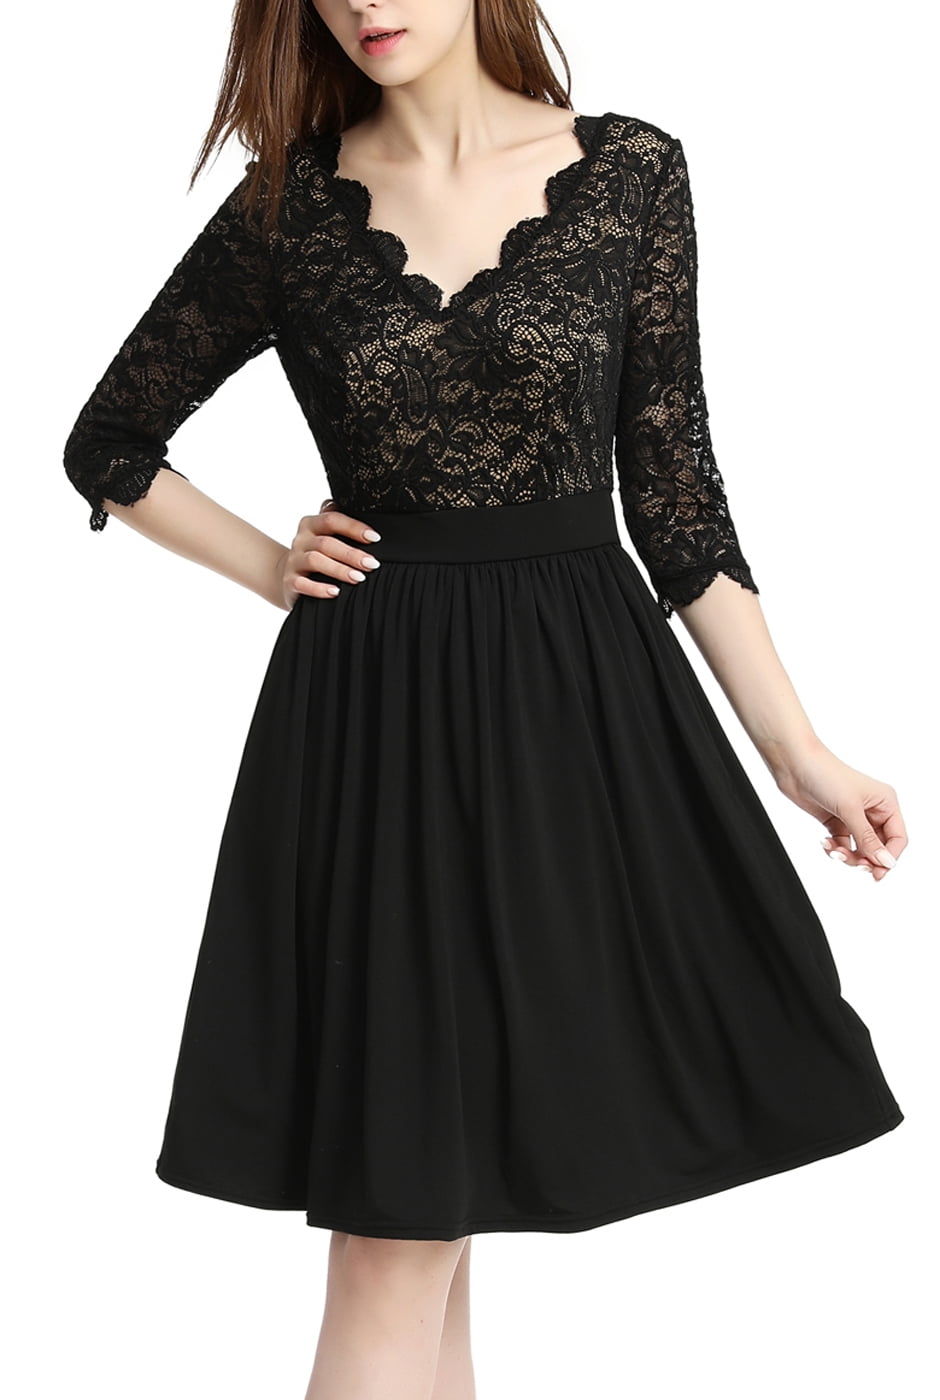 phistic Womens Fit & Flare Lace Dress